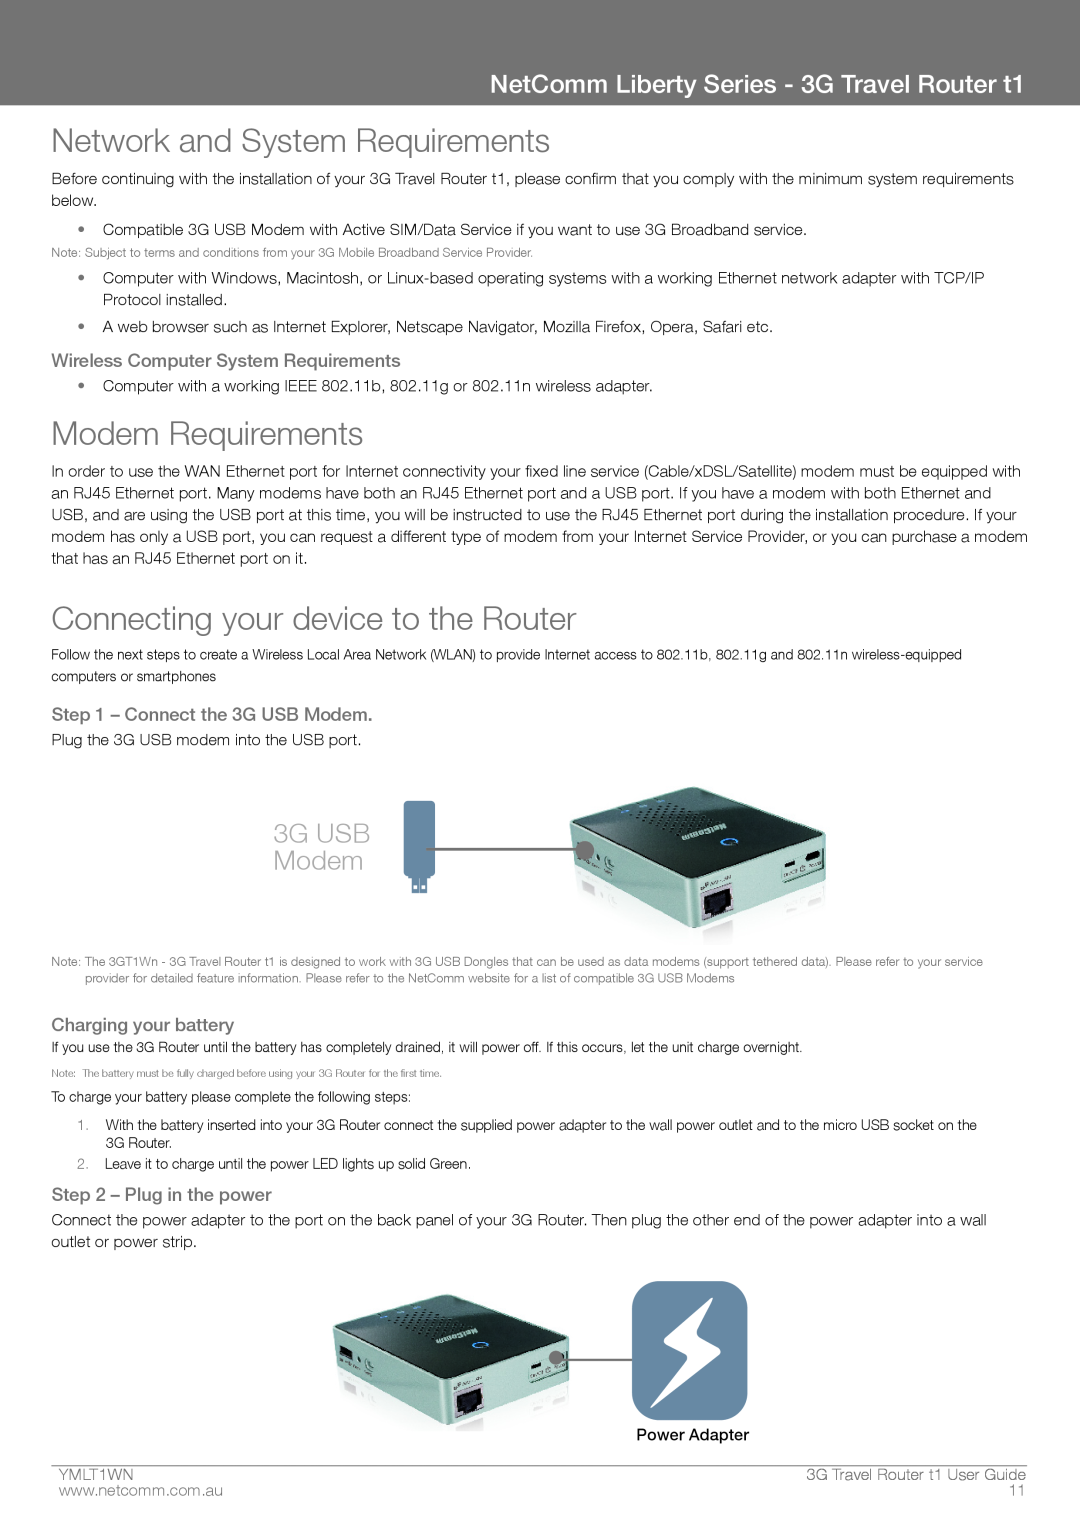 Nortel Networks T1 Network and System Requirements, Modem Requirements, Connecting your device to the Router, YMLt1T N 